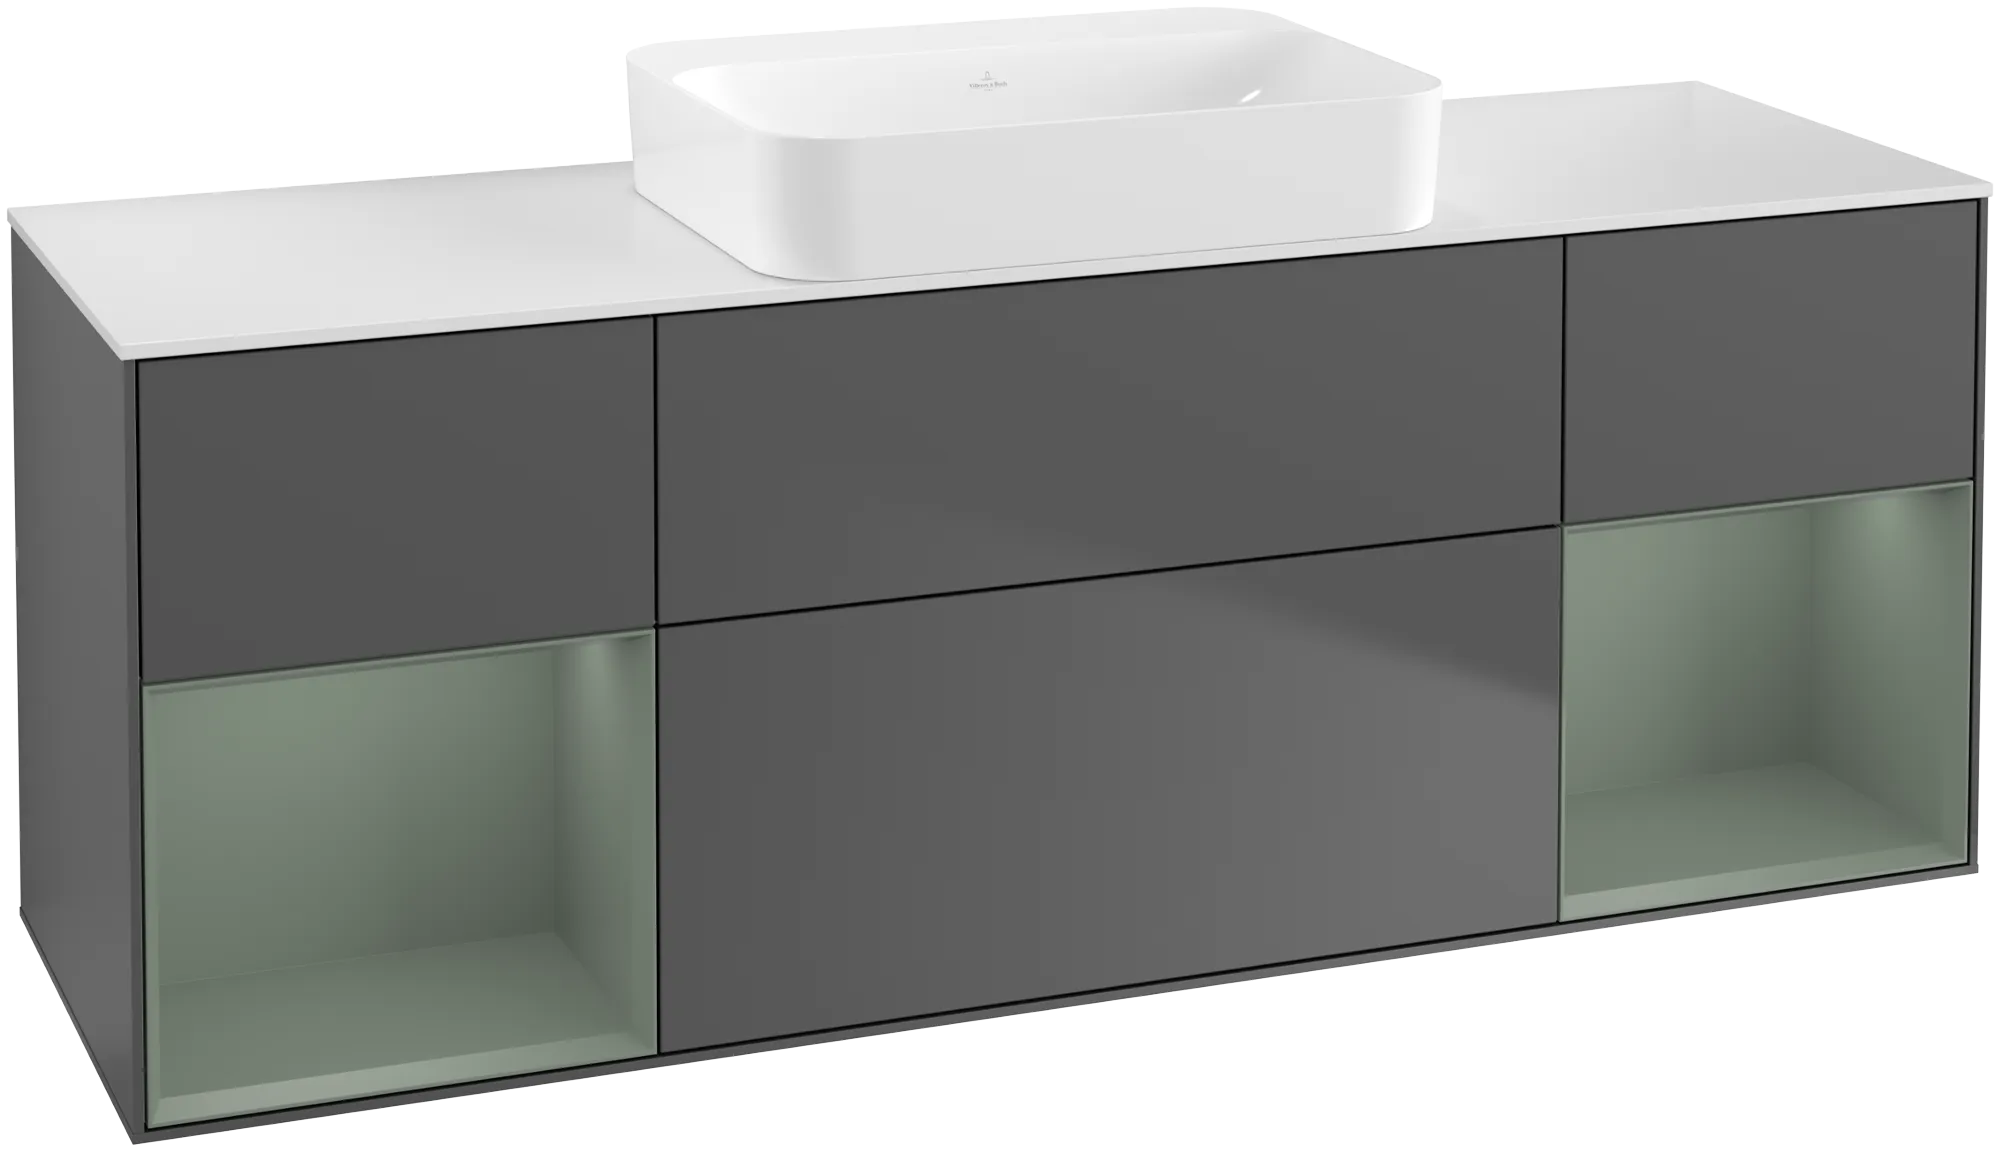 Obrázek VILLEROY BOCH Finion Vanity unit, with lighting, 4 pull-out compartments, 1600 x 603 x 501 mm, Anthracite Matt Lacquer / Olive Matt Lacquer / Glass White Matt #G741GMGK